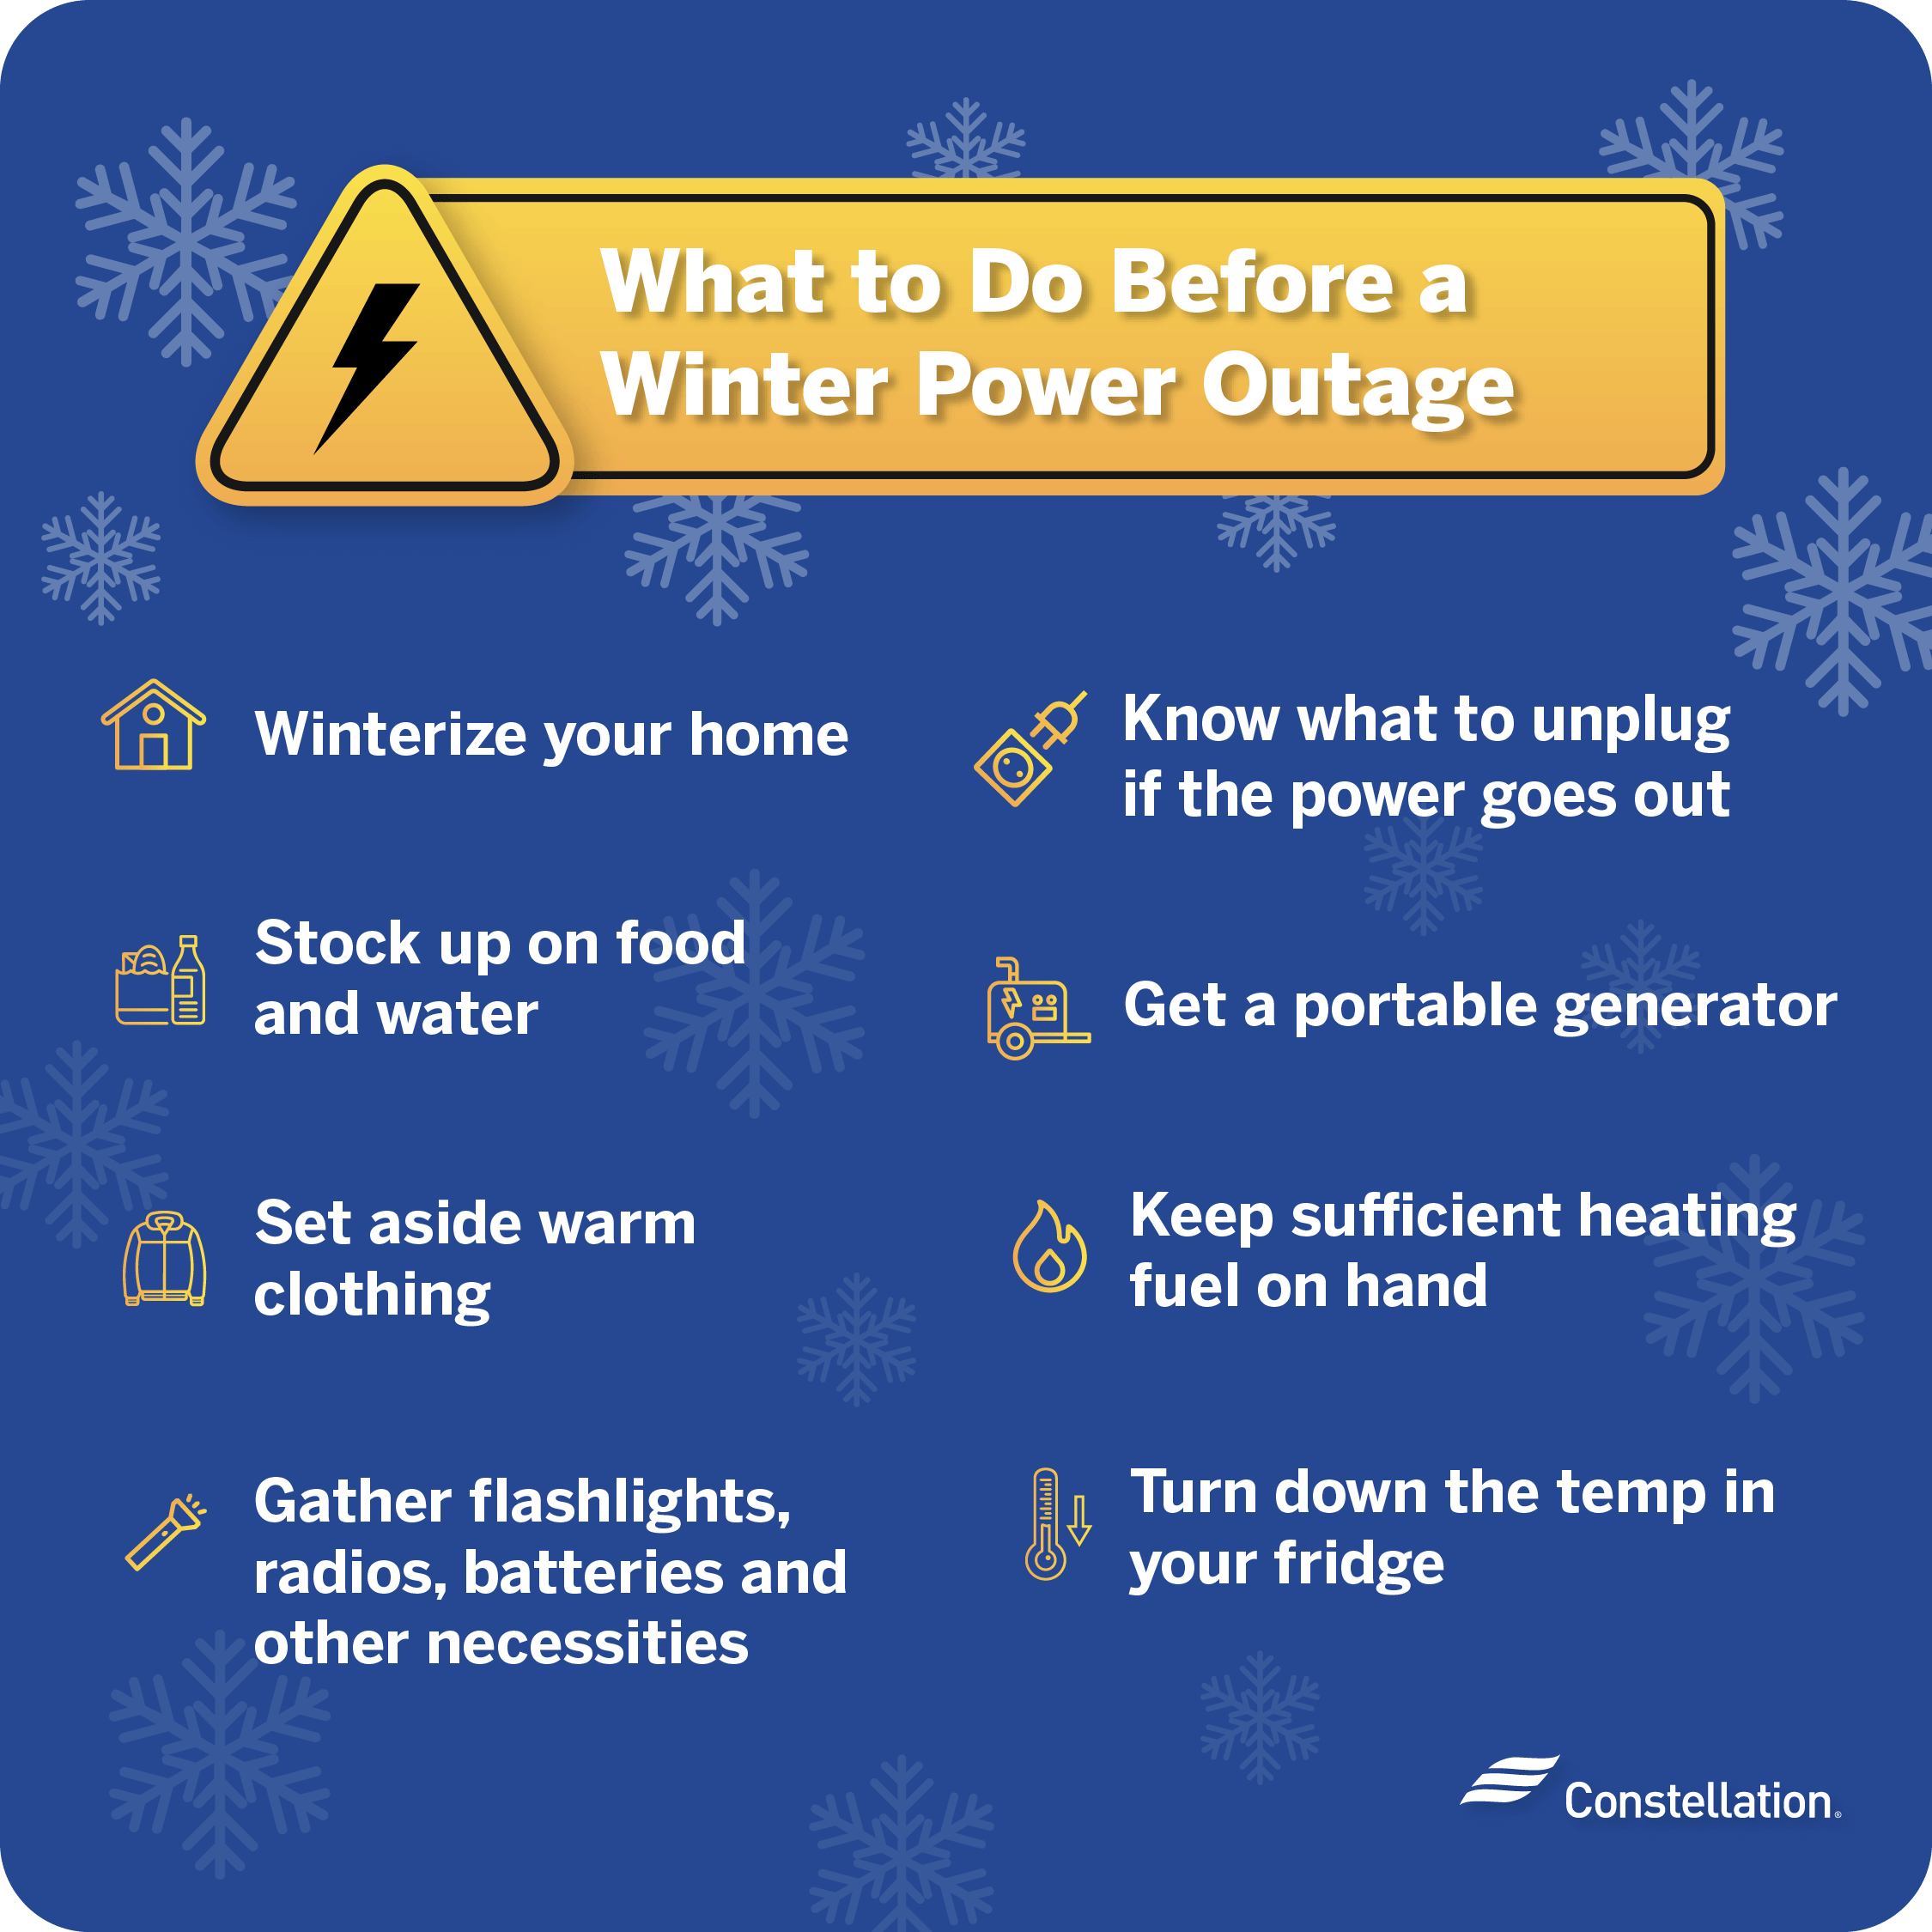 How to prepare for a winter power outage.